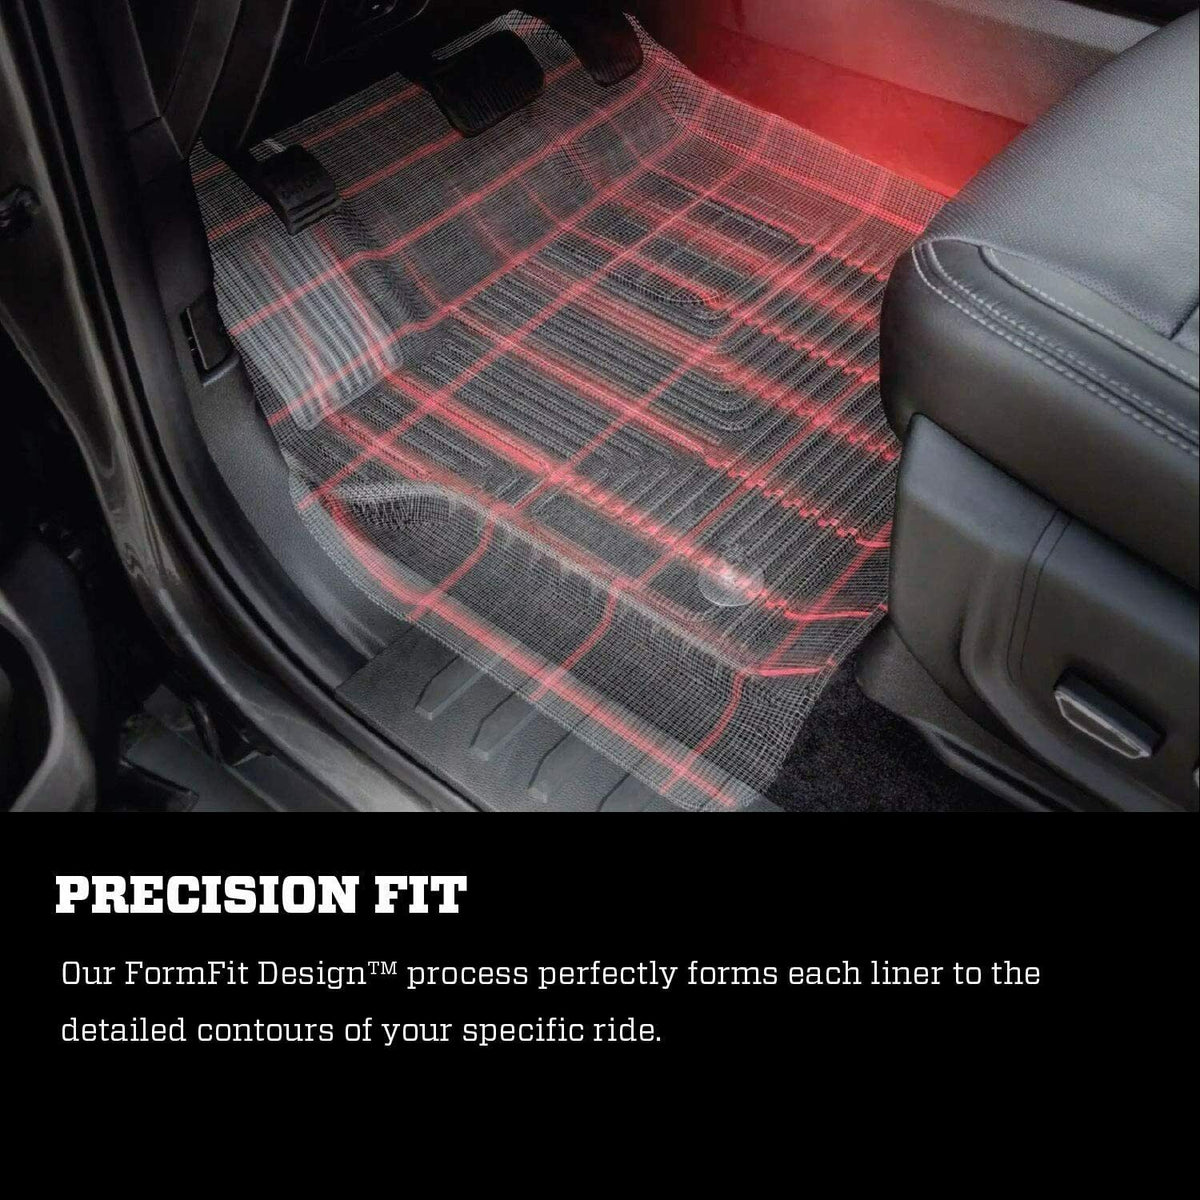 Ram 1500 2019-2023 Crew Cab New Body Style Husky 94001 Front and Back Floor Mats